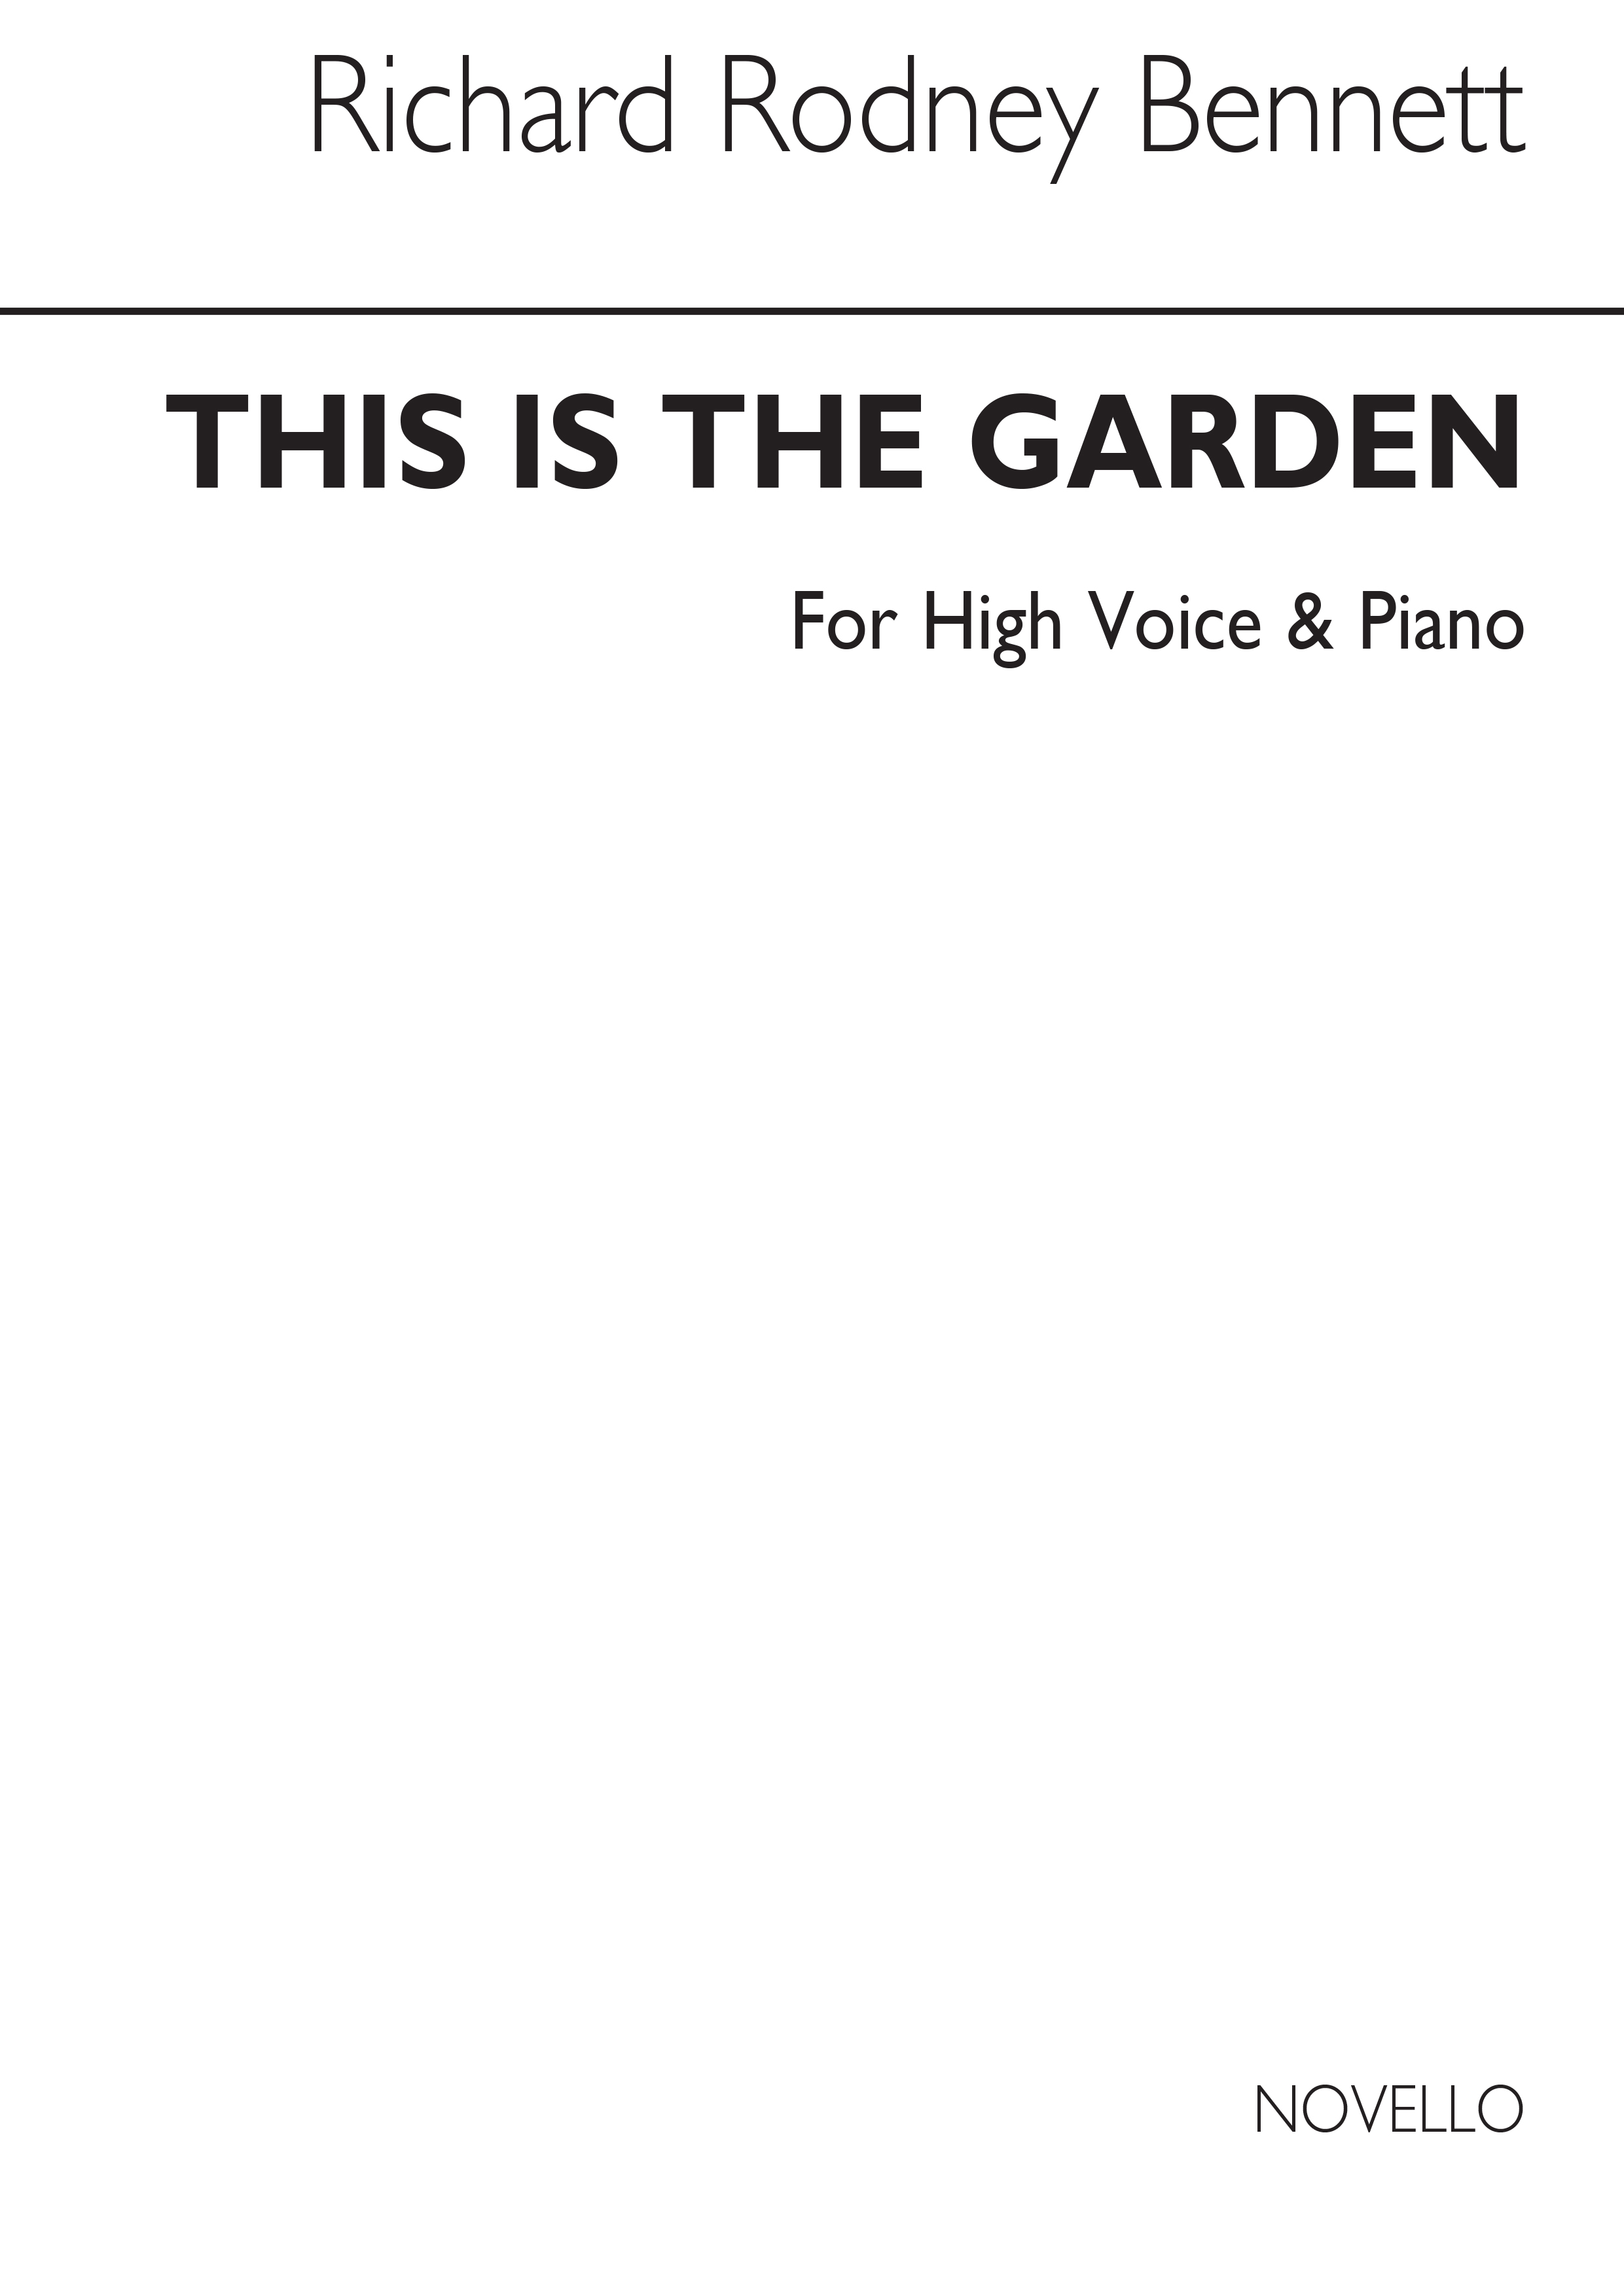 RR Bennett: This Is The Garden for Voice and Piano accompaniment